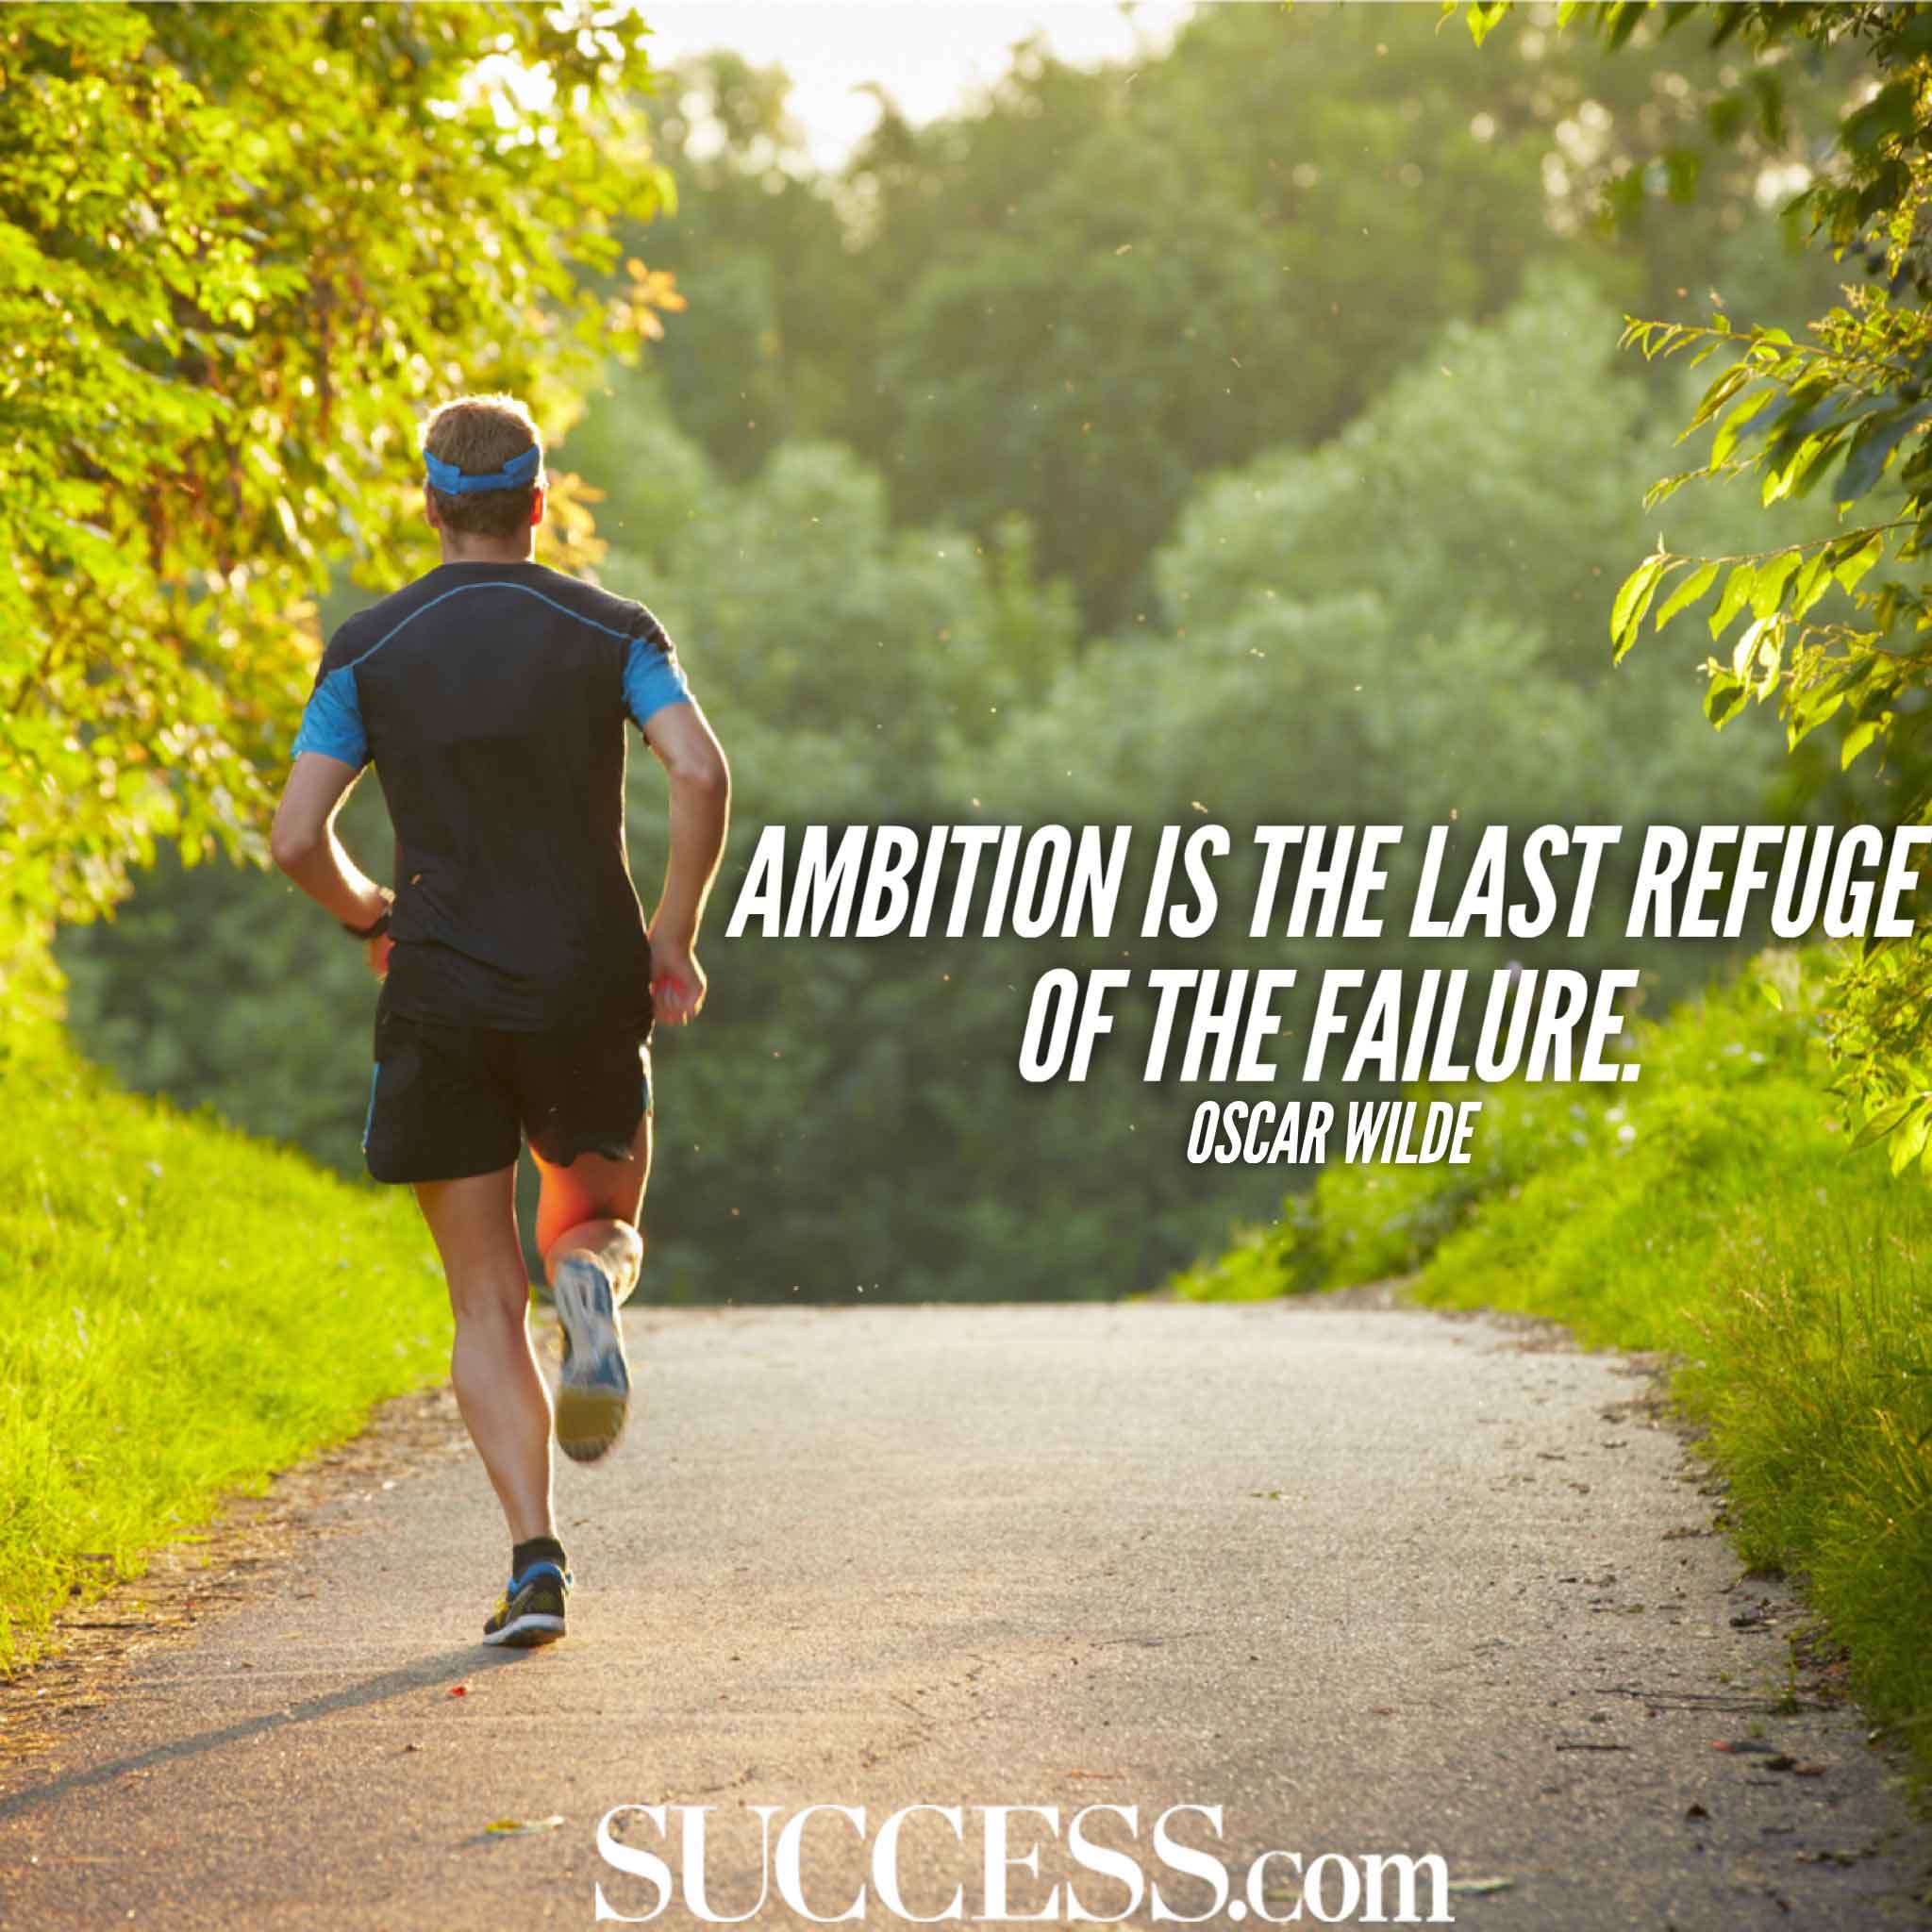 13 Motivational Quotes About the Power of Ambition